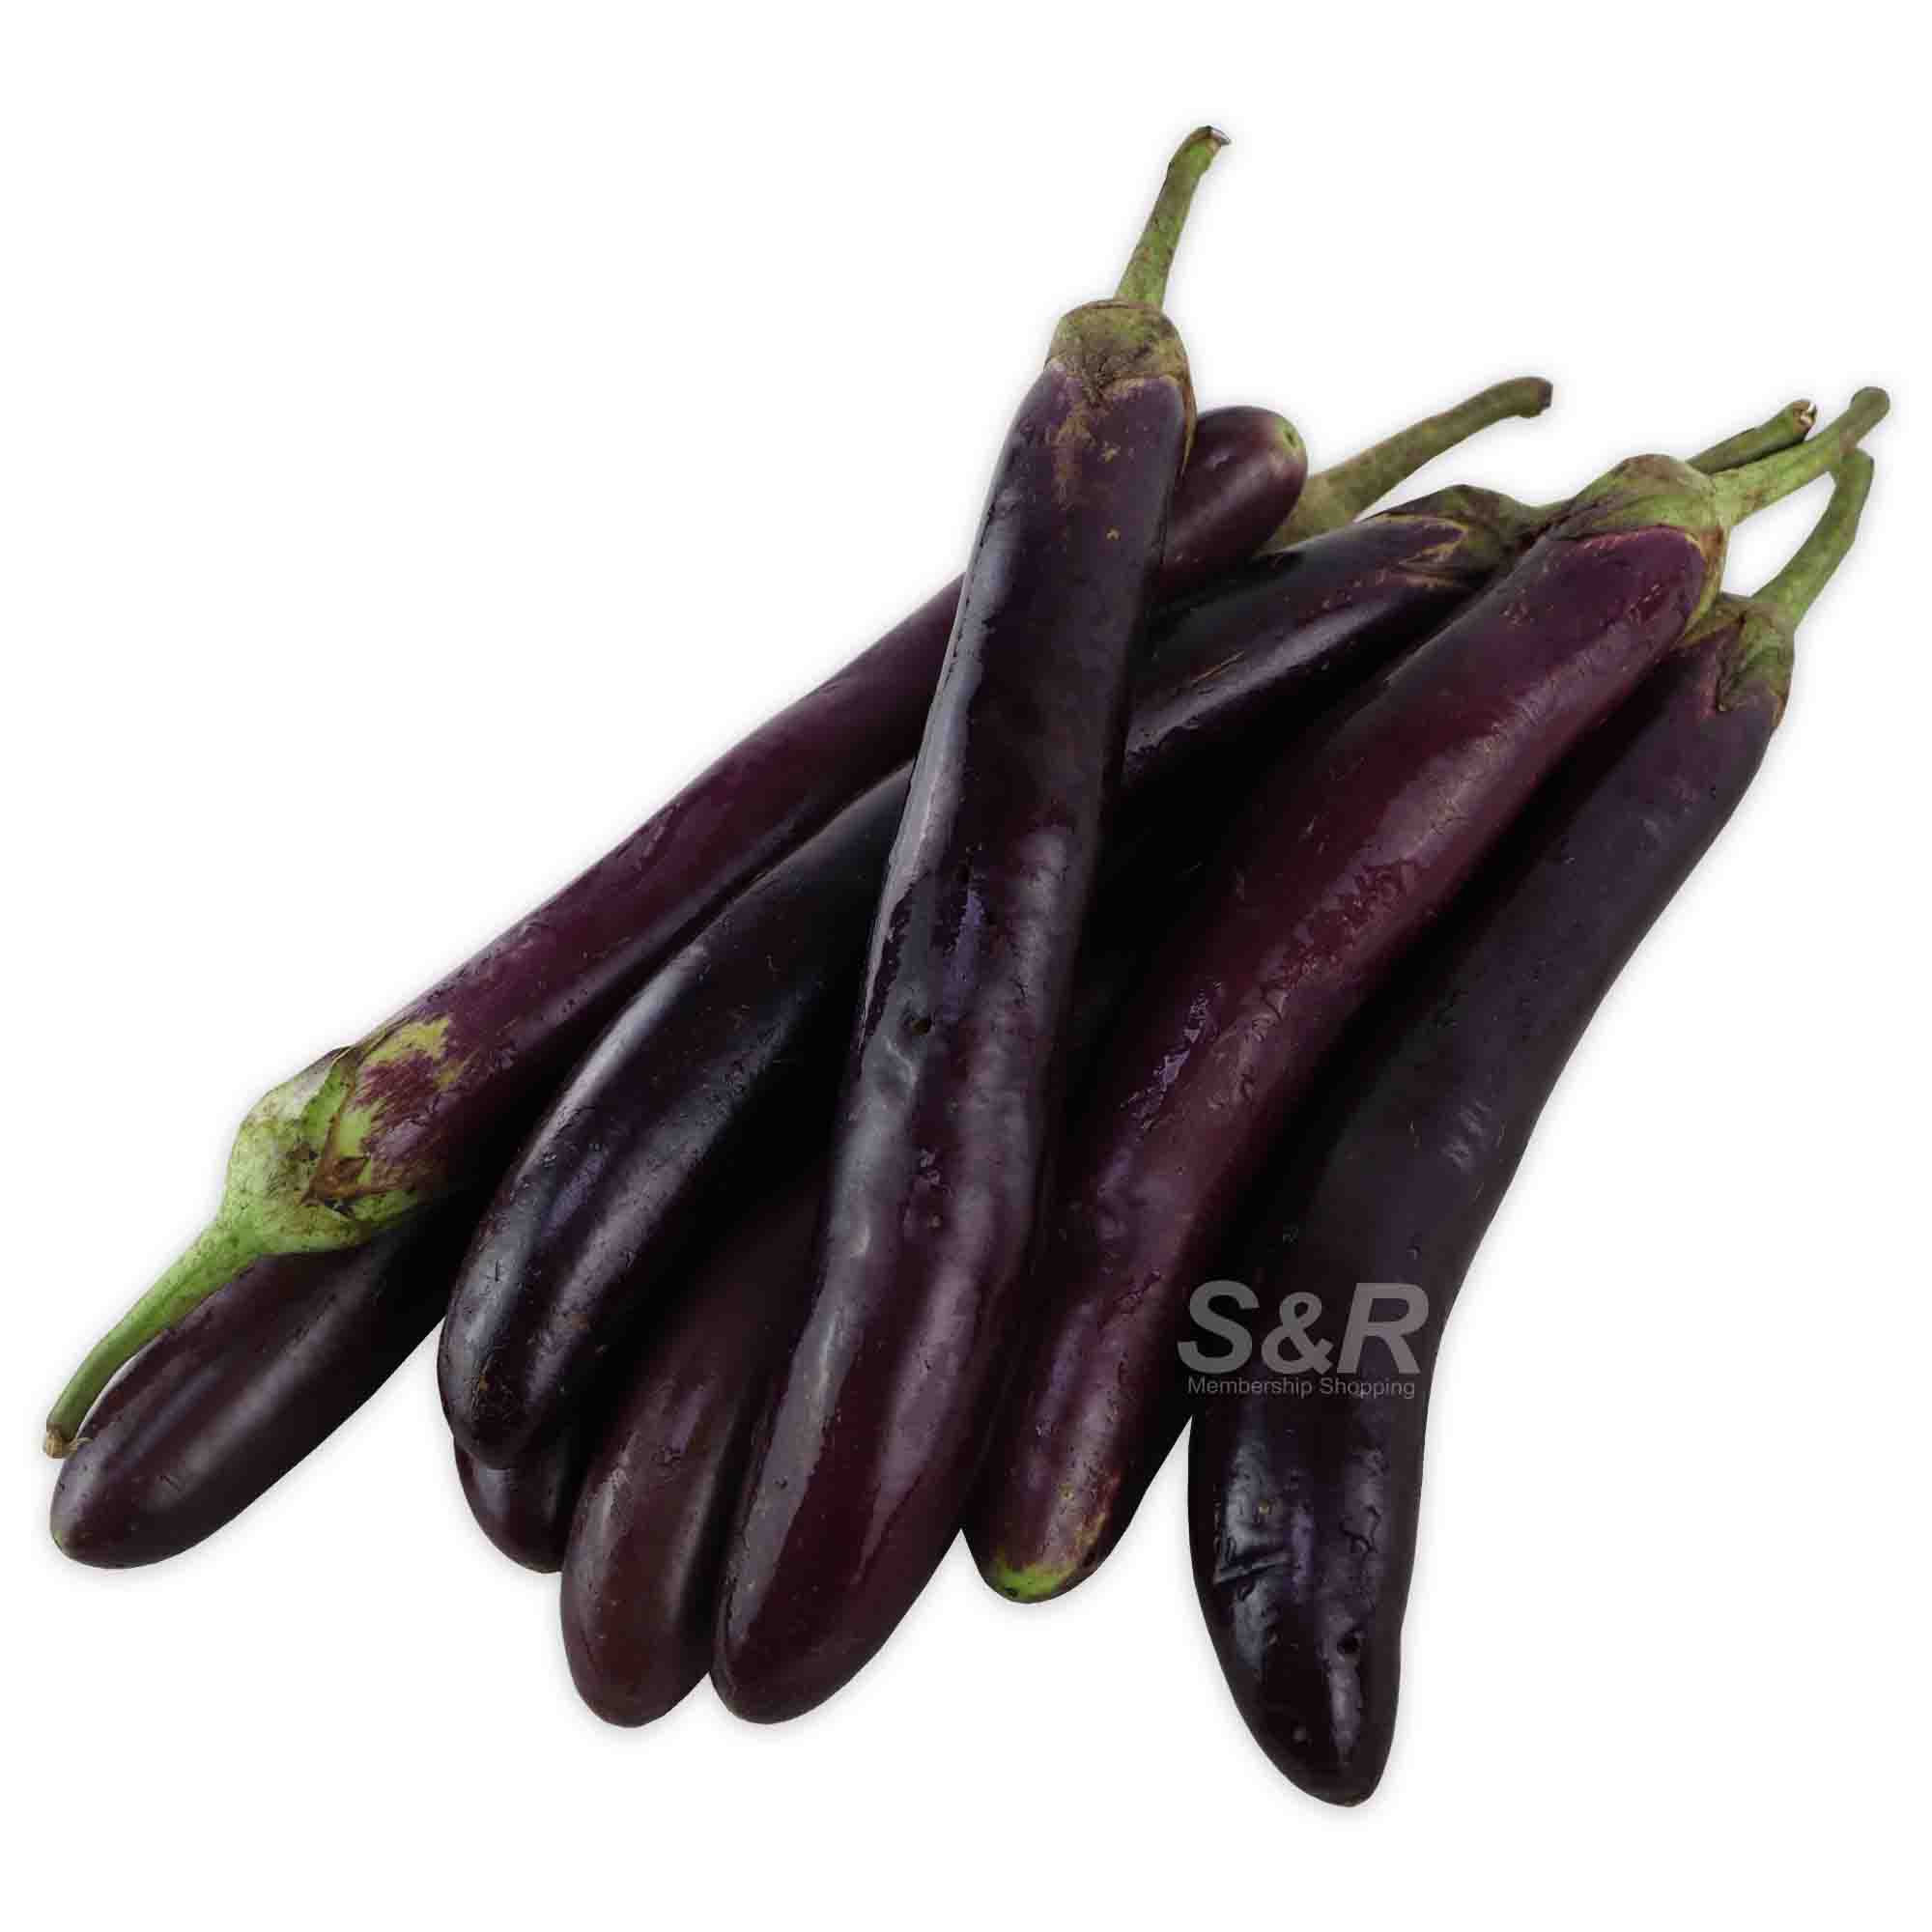 S&R Large Eggplant approx. 1.4kg